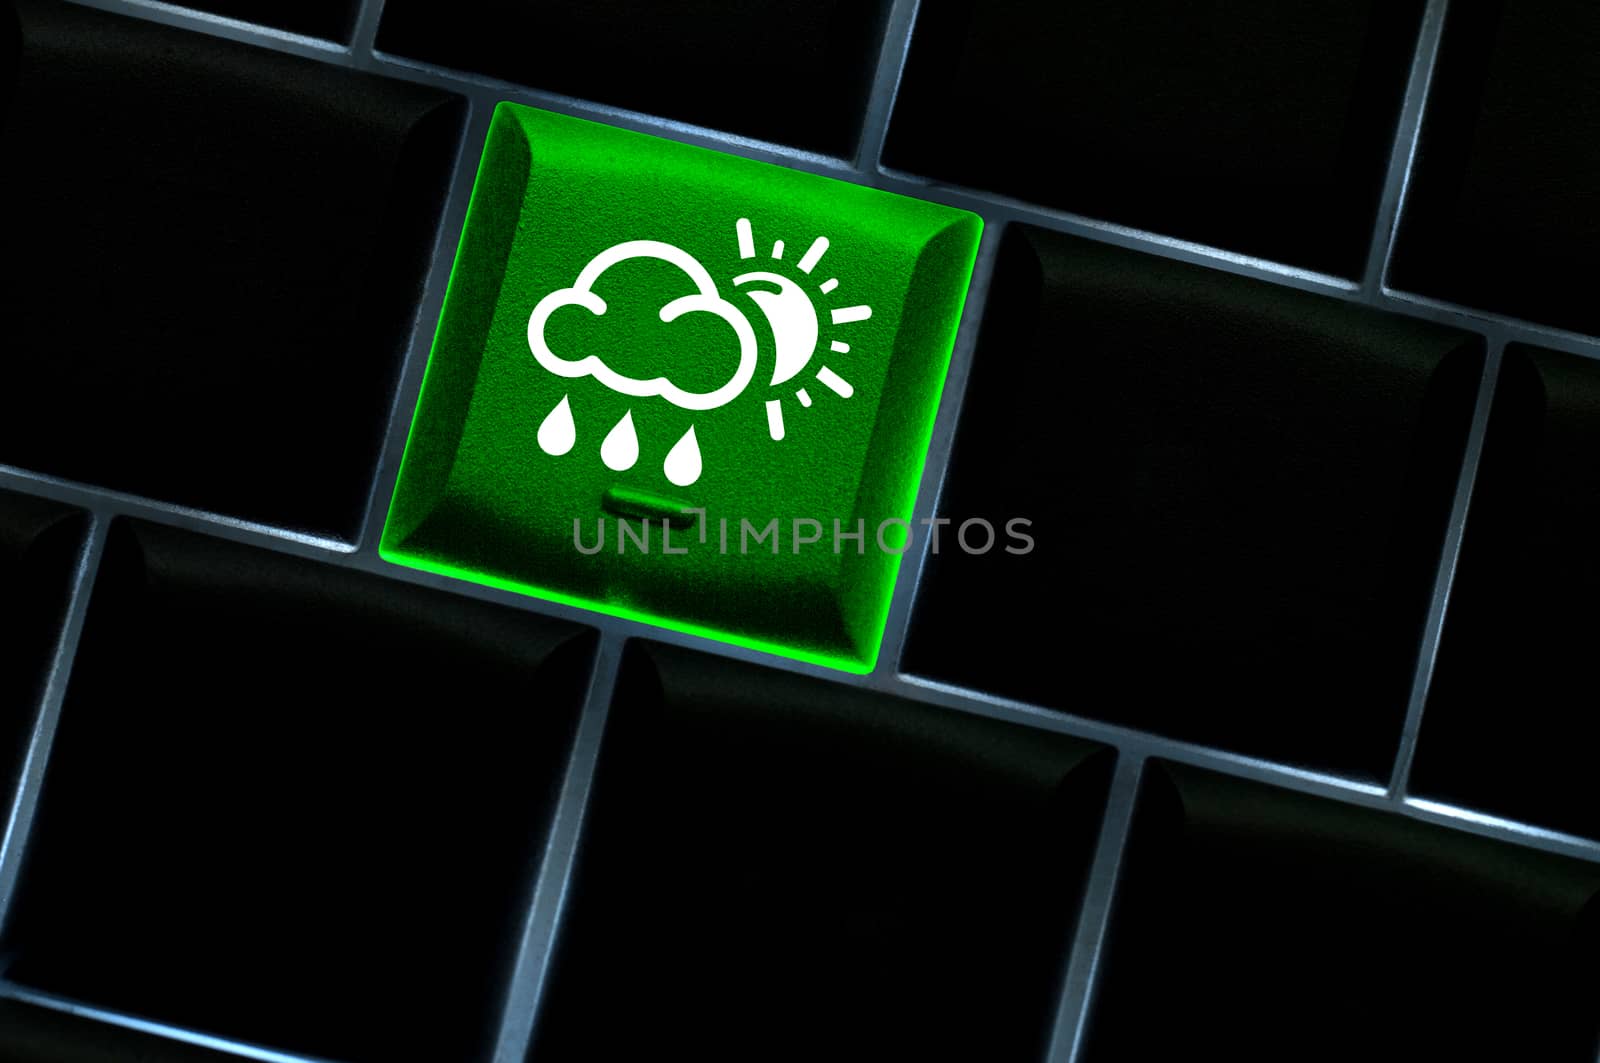 Online weather Concept with back lit keyboard by daoleduc